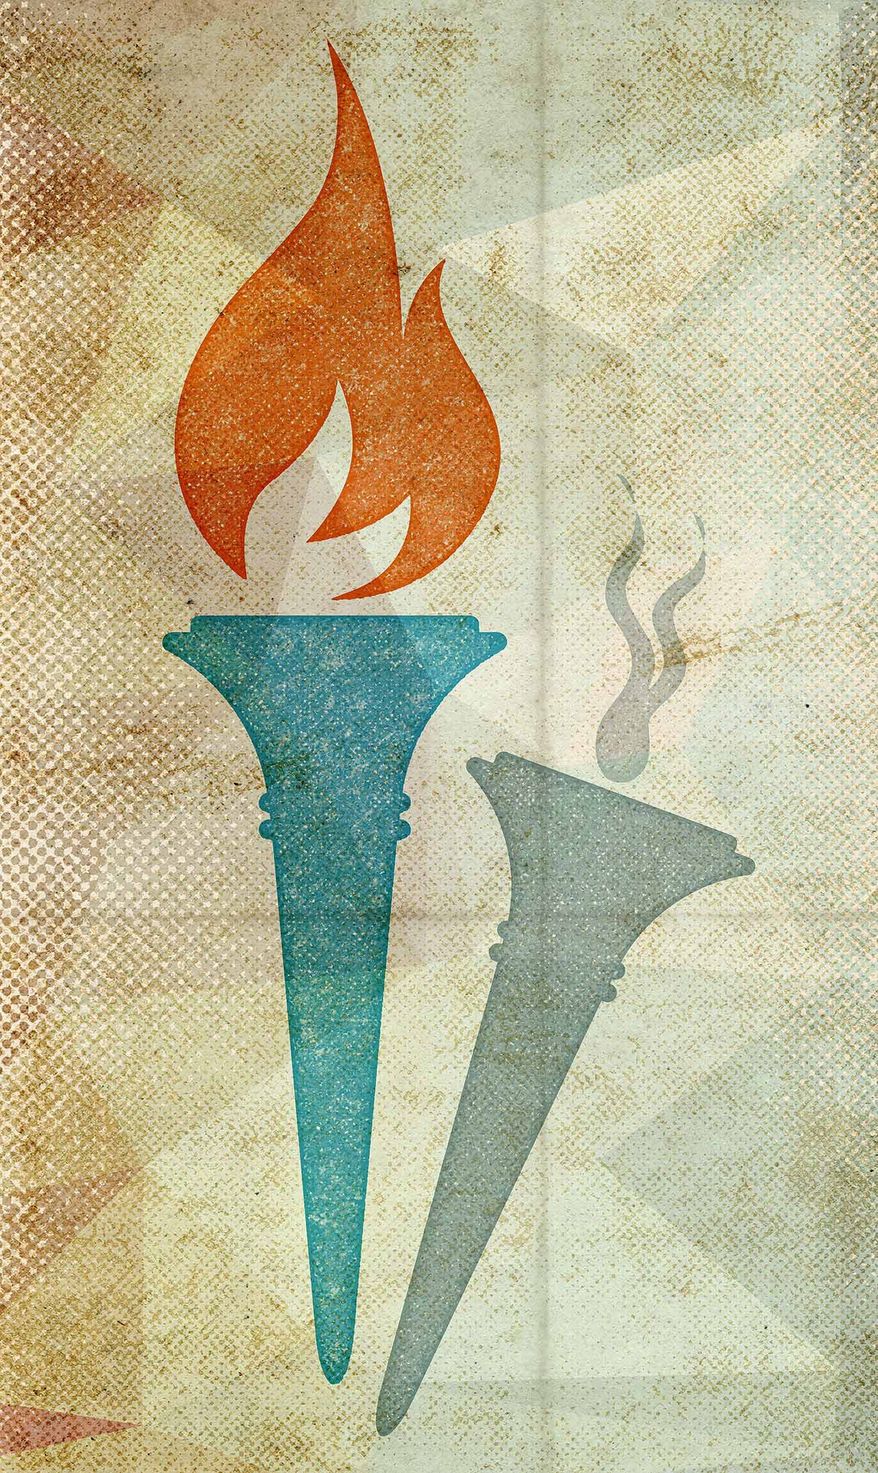 House Freedom Caucus Torch Illustration by Greg Groesch/The Washington Times